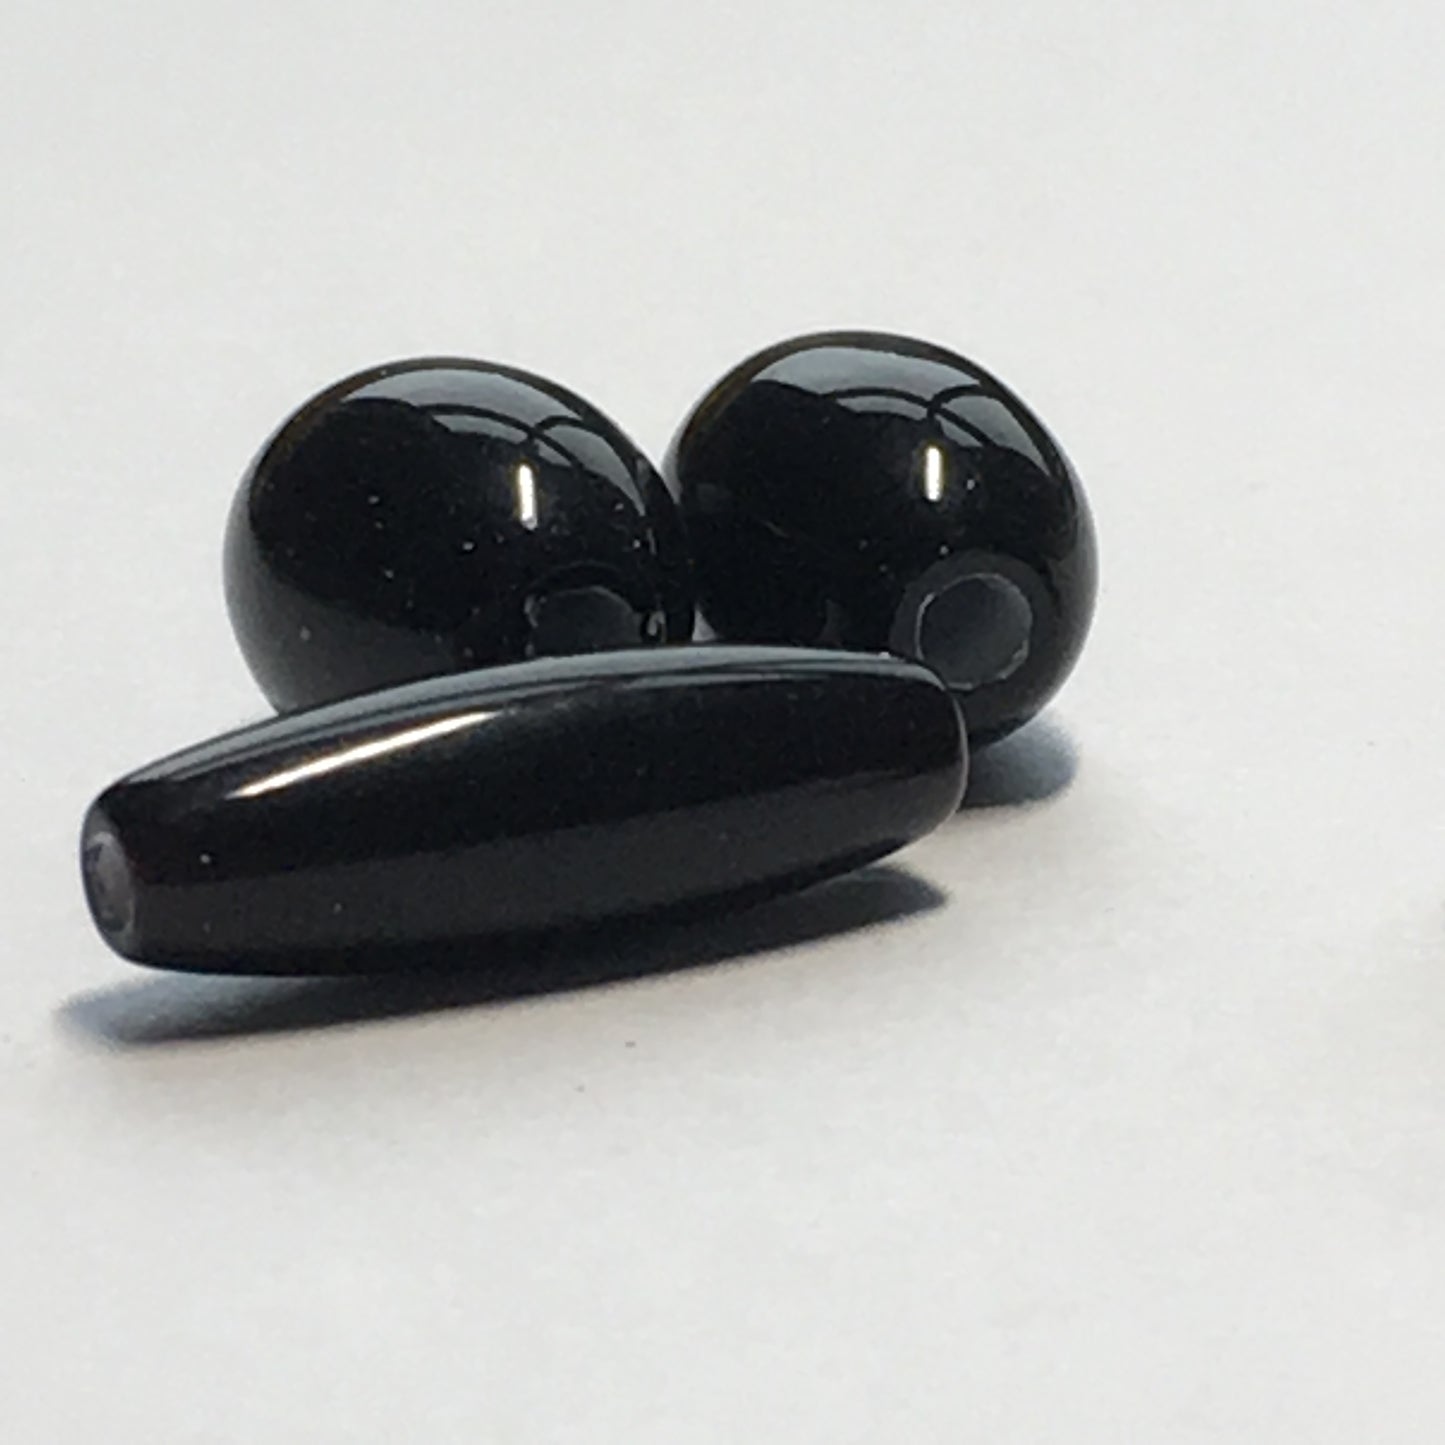 Opaque Black Oval and Tube Glass Lampwork Beads, 16 x 5 mm & 11 x 8 mm, 4 Beads